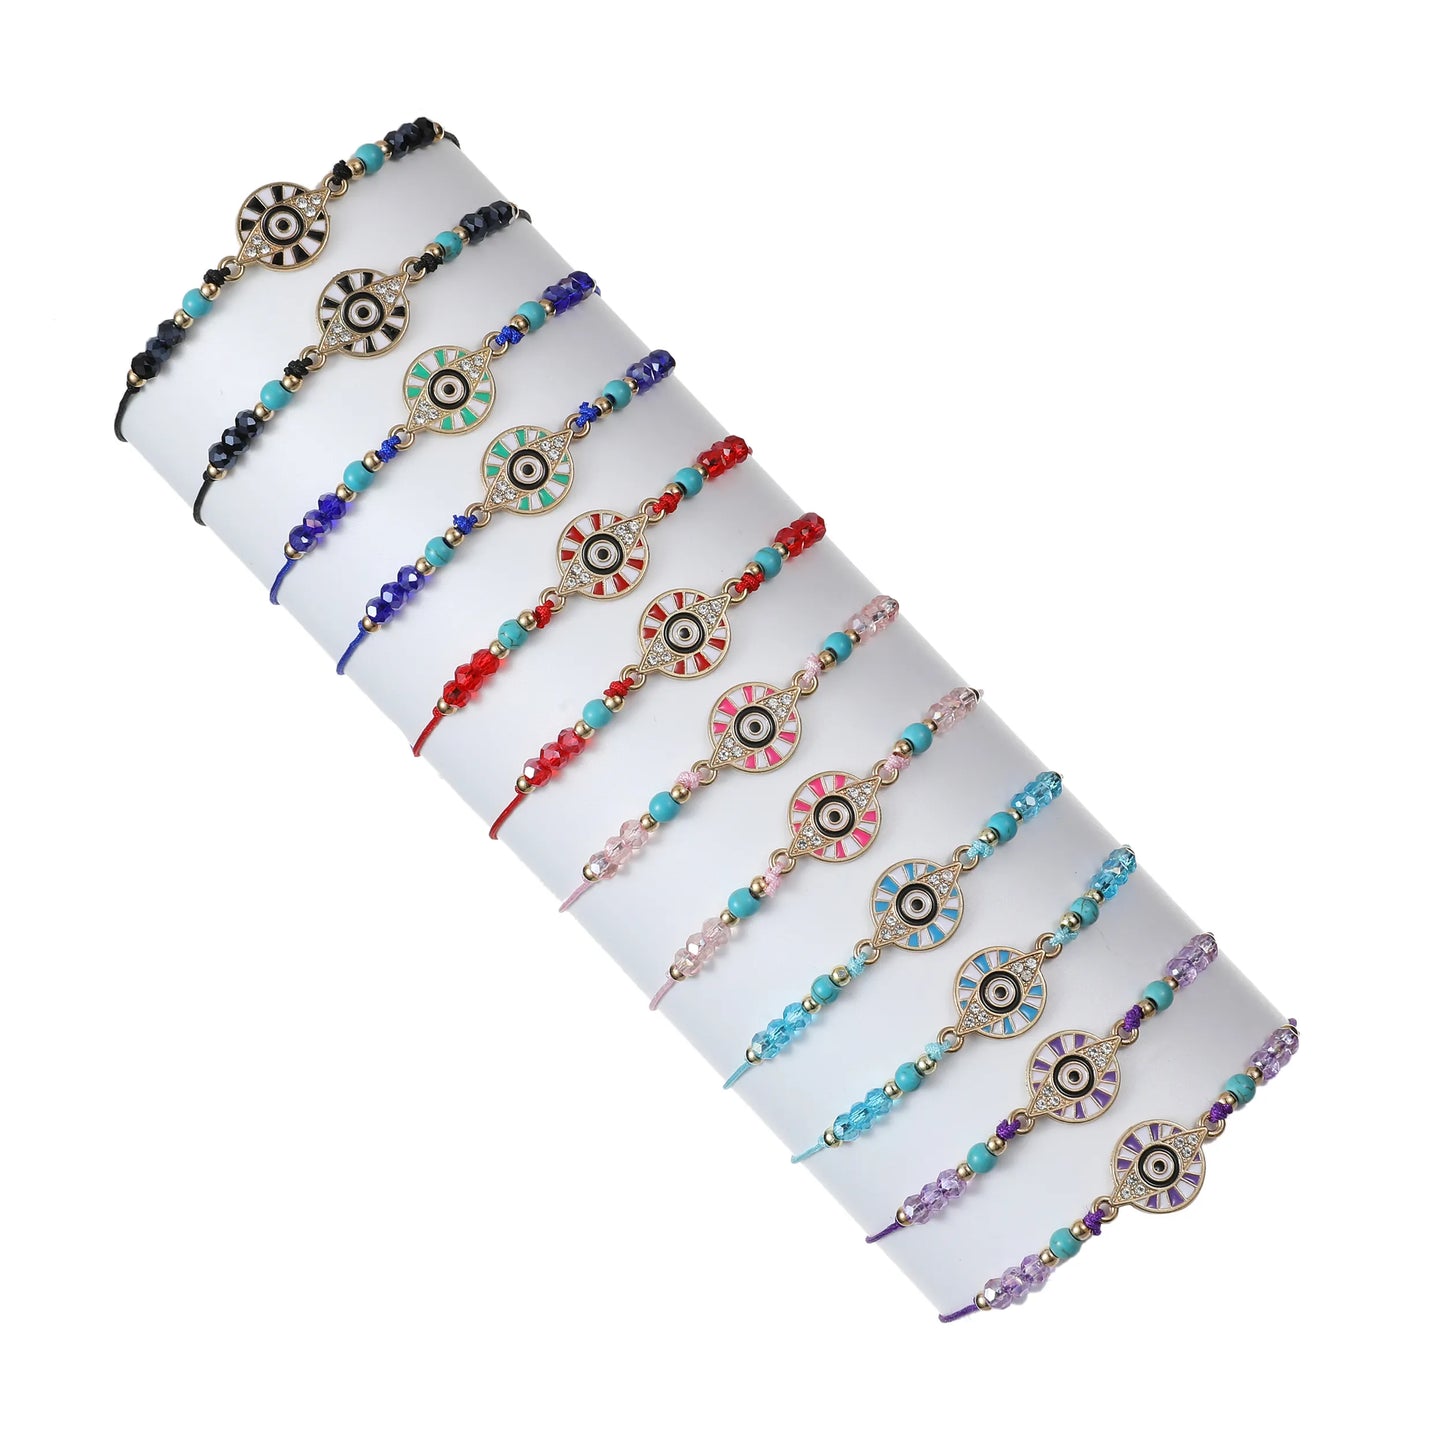 12pcs Evil Eye Color Oil Painting Bracelets for Women Girls Braided Red Rope Lucky Bracelets Fashion Friendship Jewelry